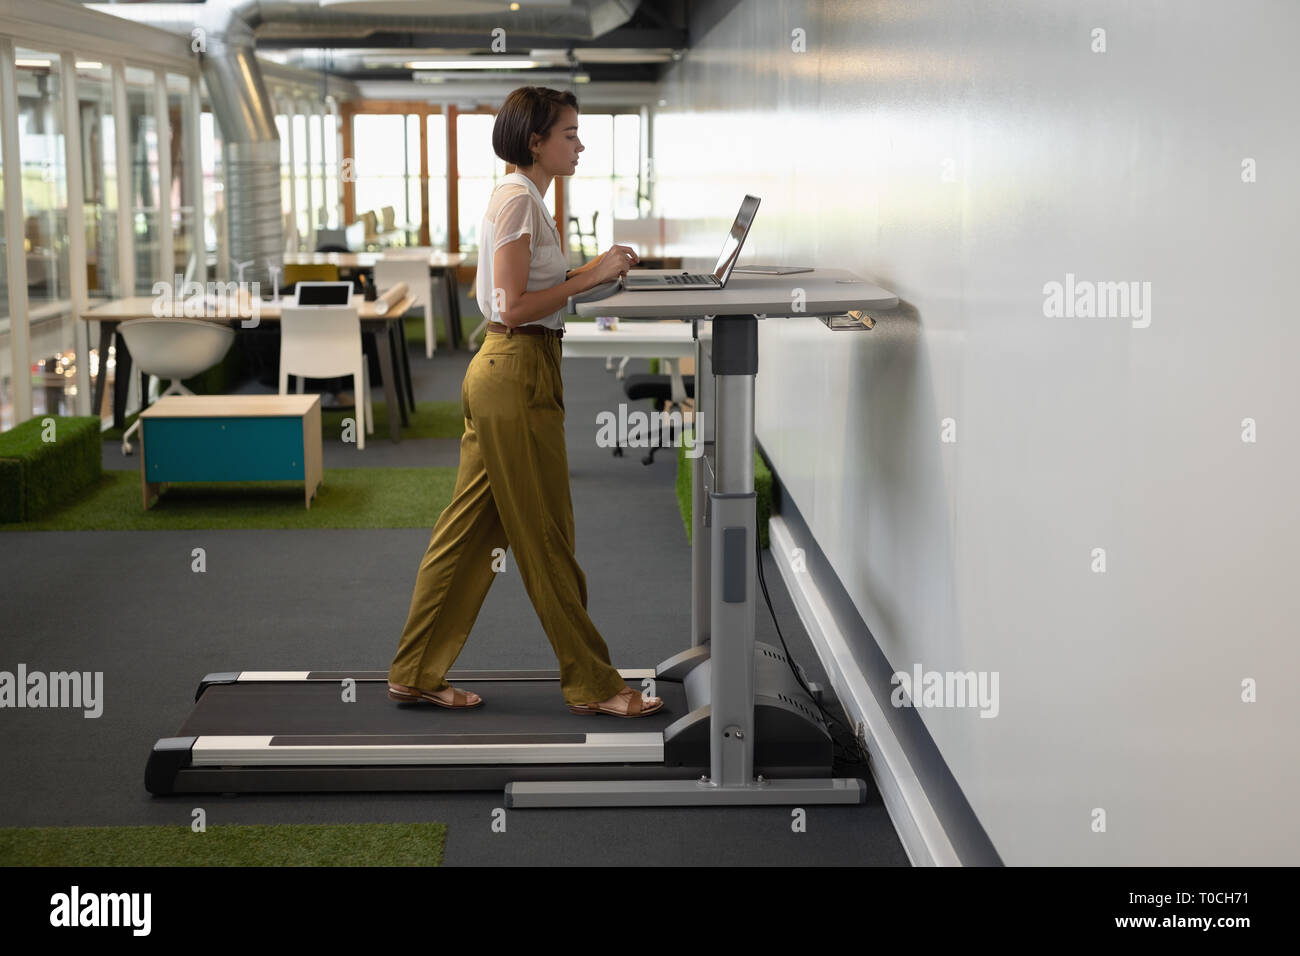 Businesswoman Working On Laptop While Doing Exercise On Treadmill